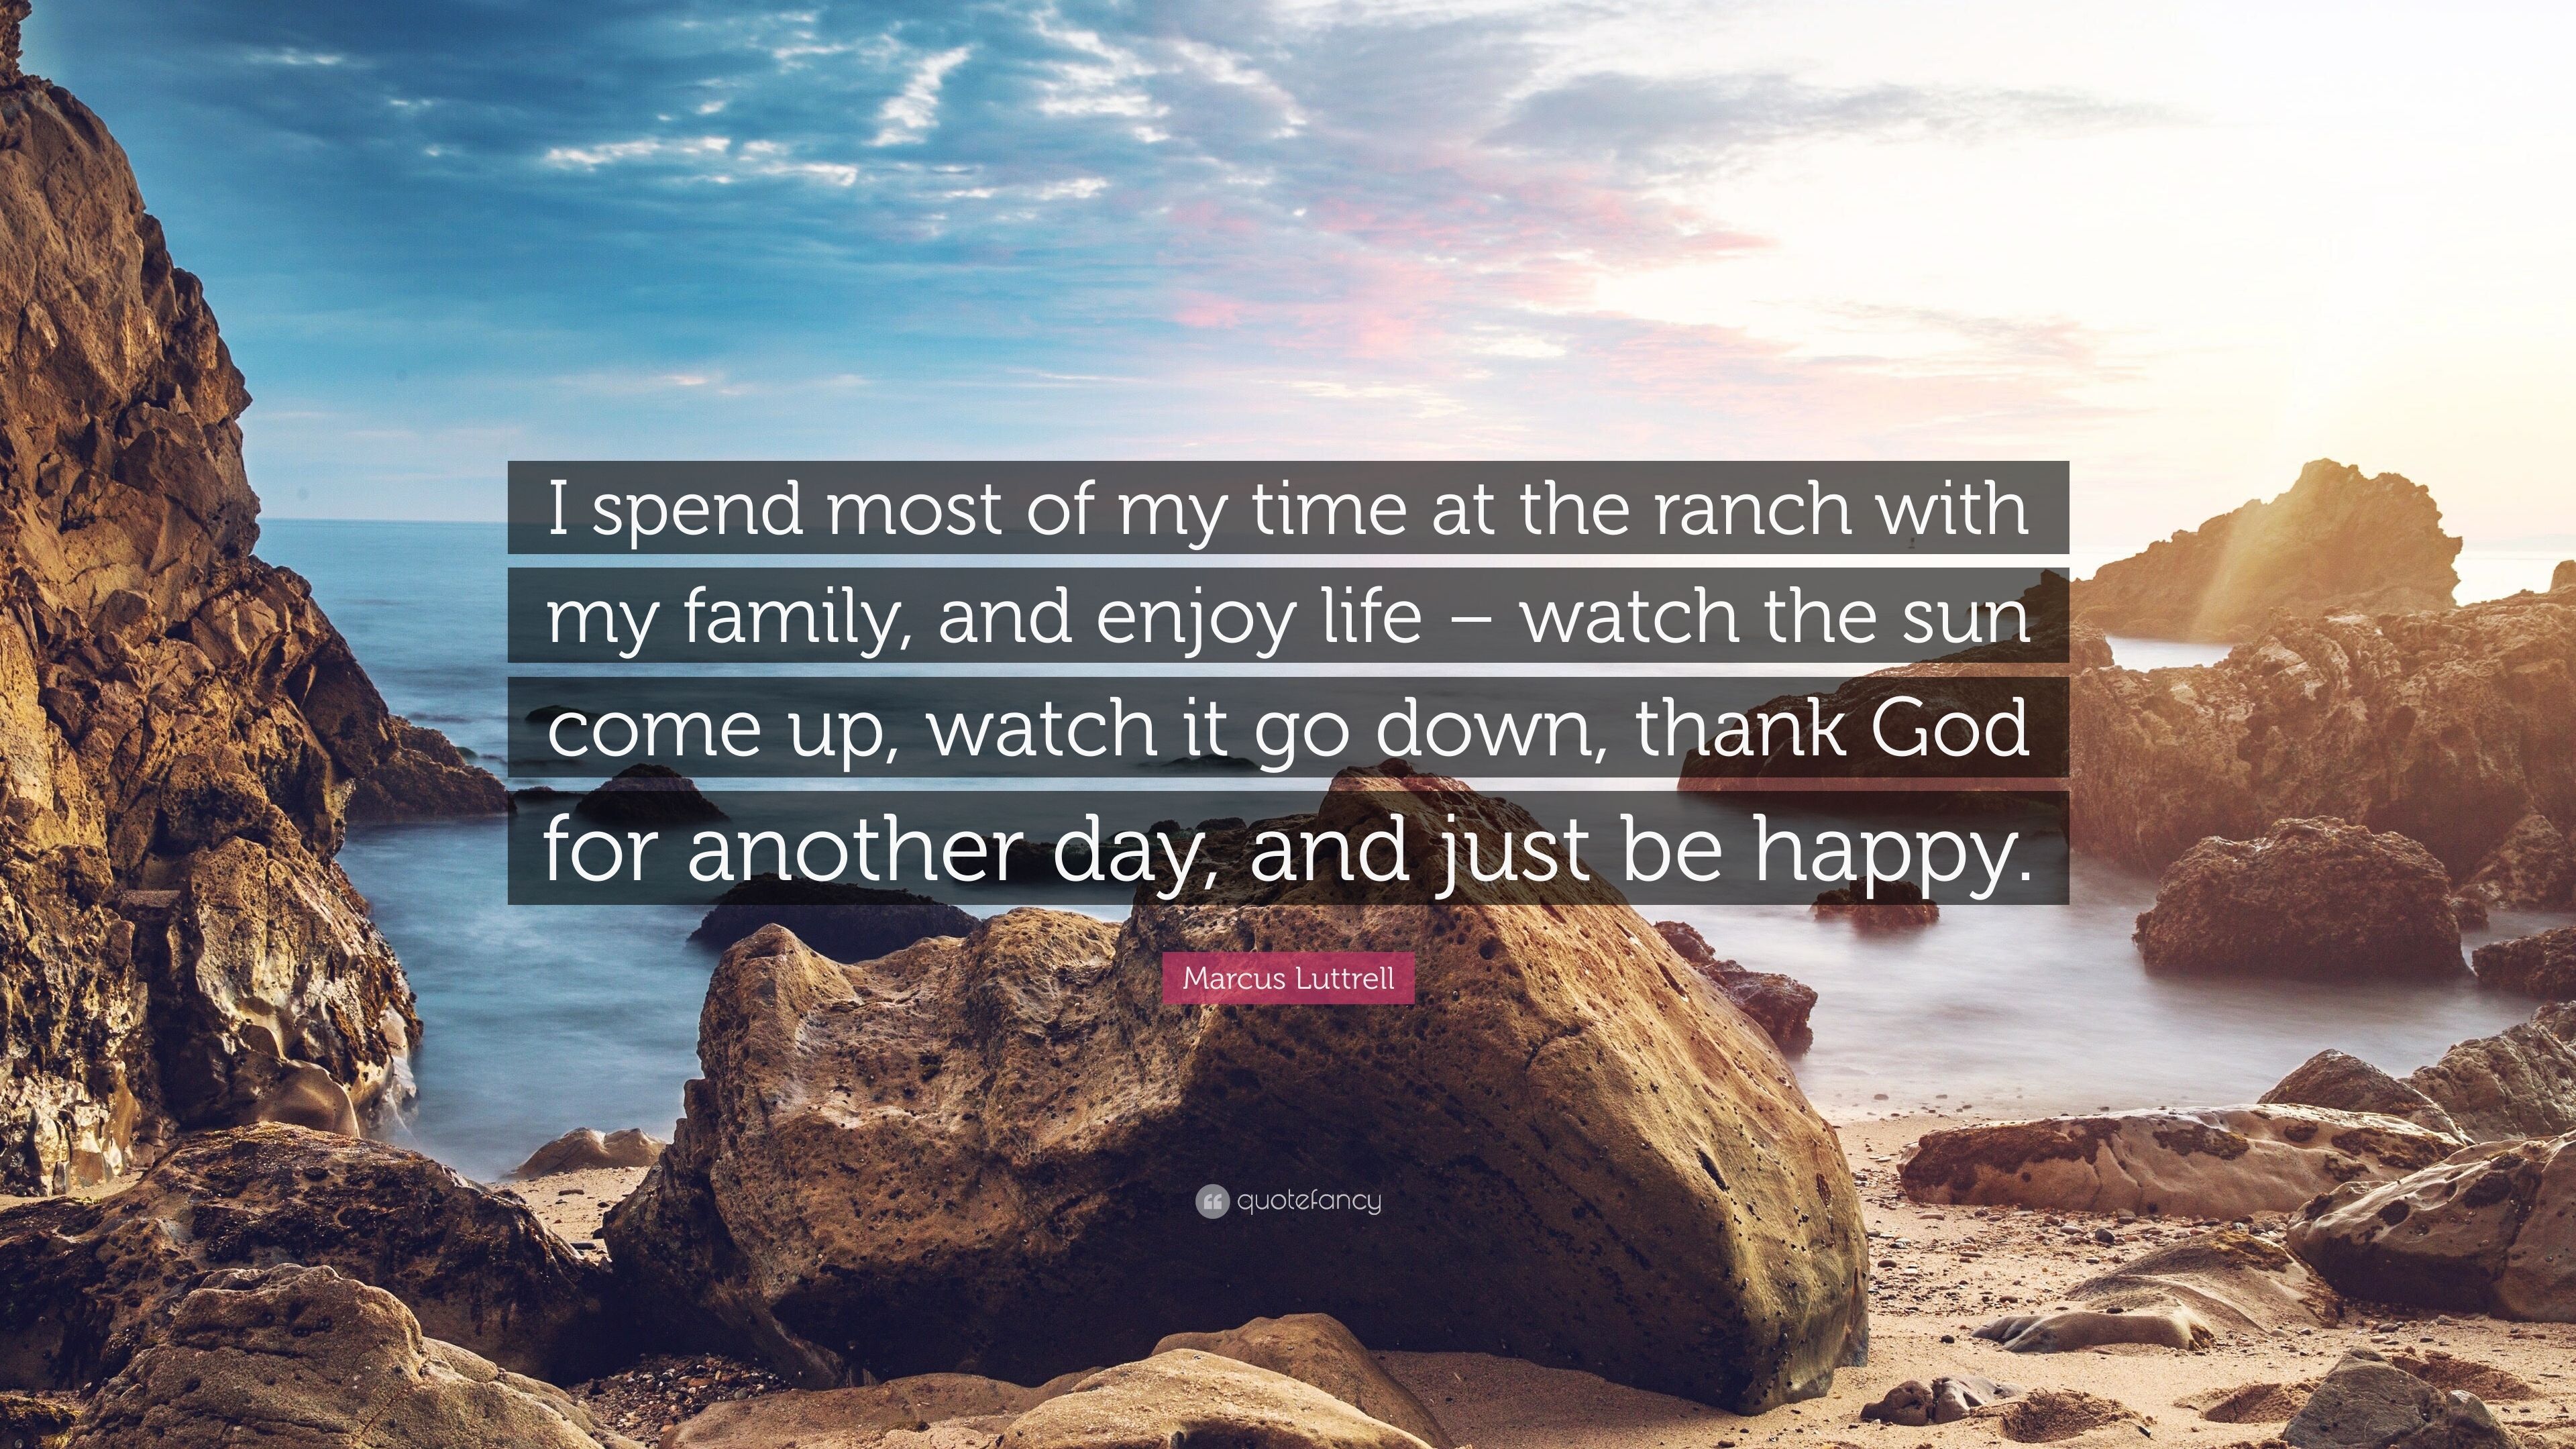 Marcus Luttrell Quote: “I spend most of my time at the ranch with my